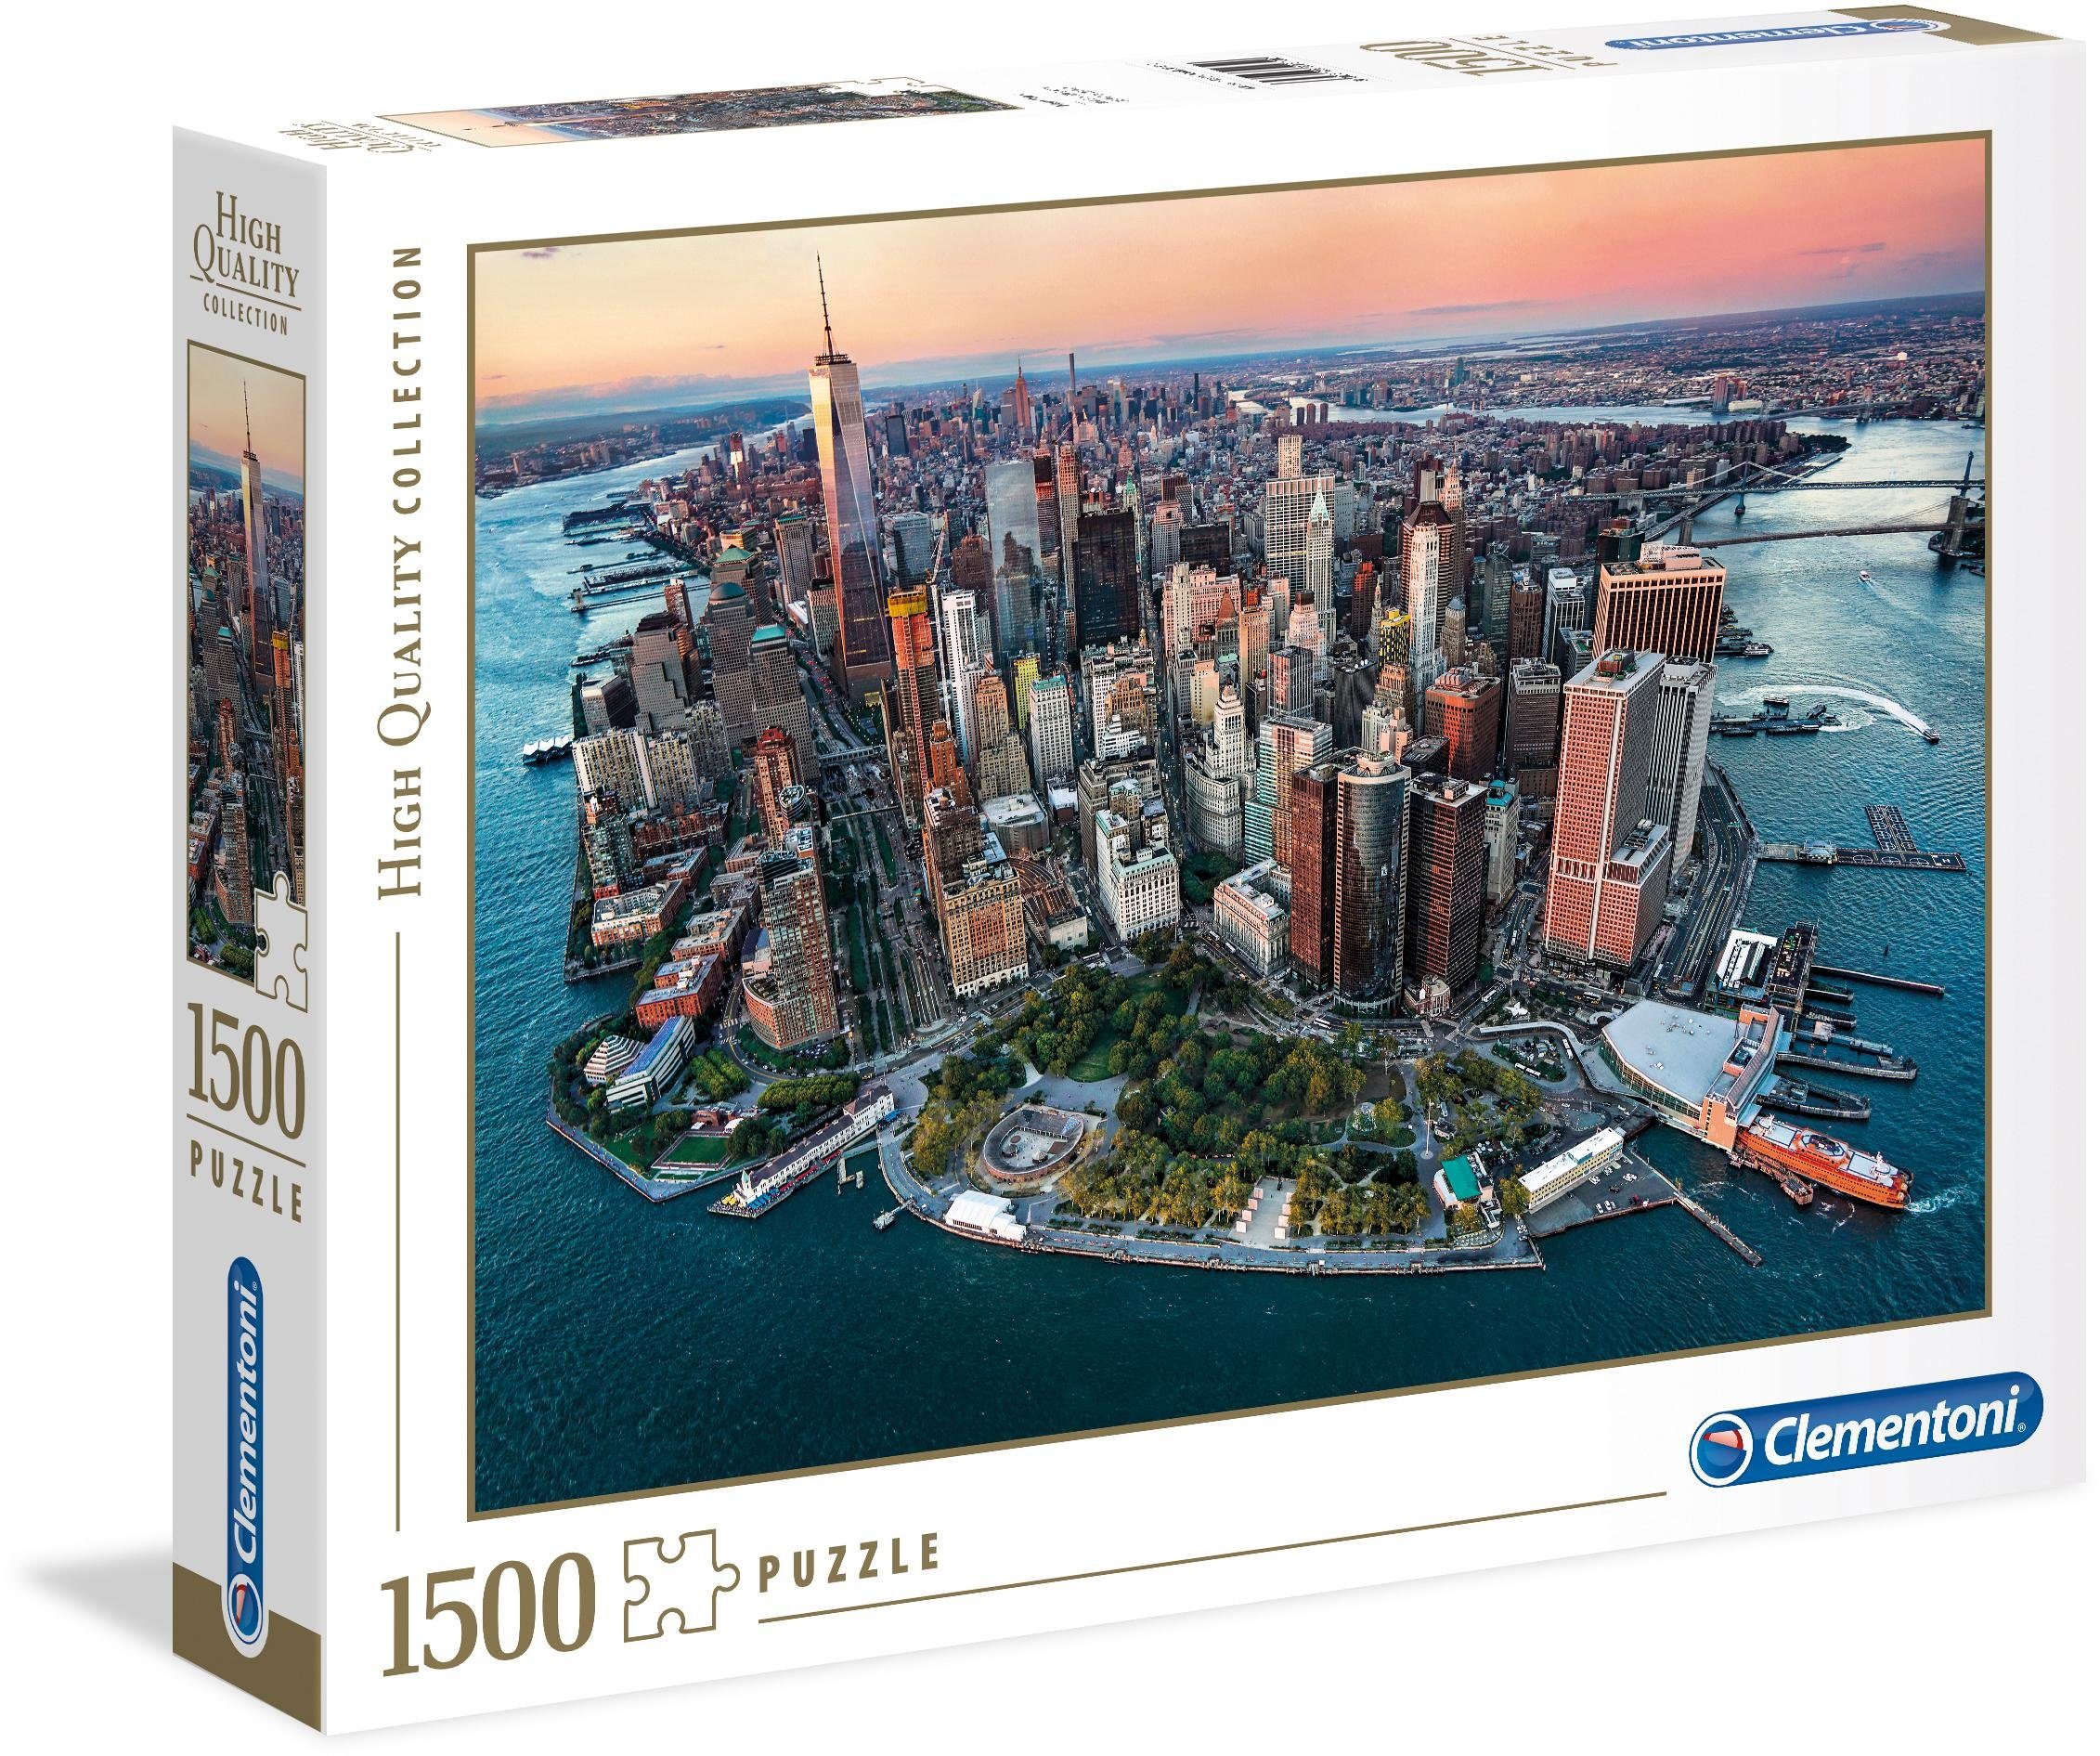 Puzzle Quality High Collection, Europe 1500 Made New Clementoni® Puzzleteile, York, in